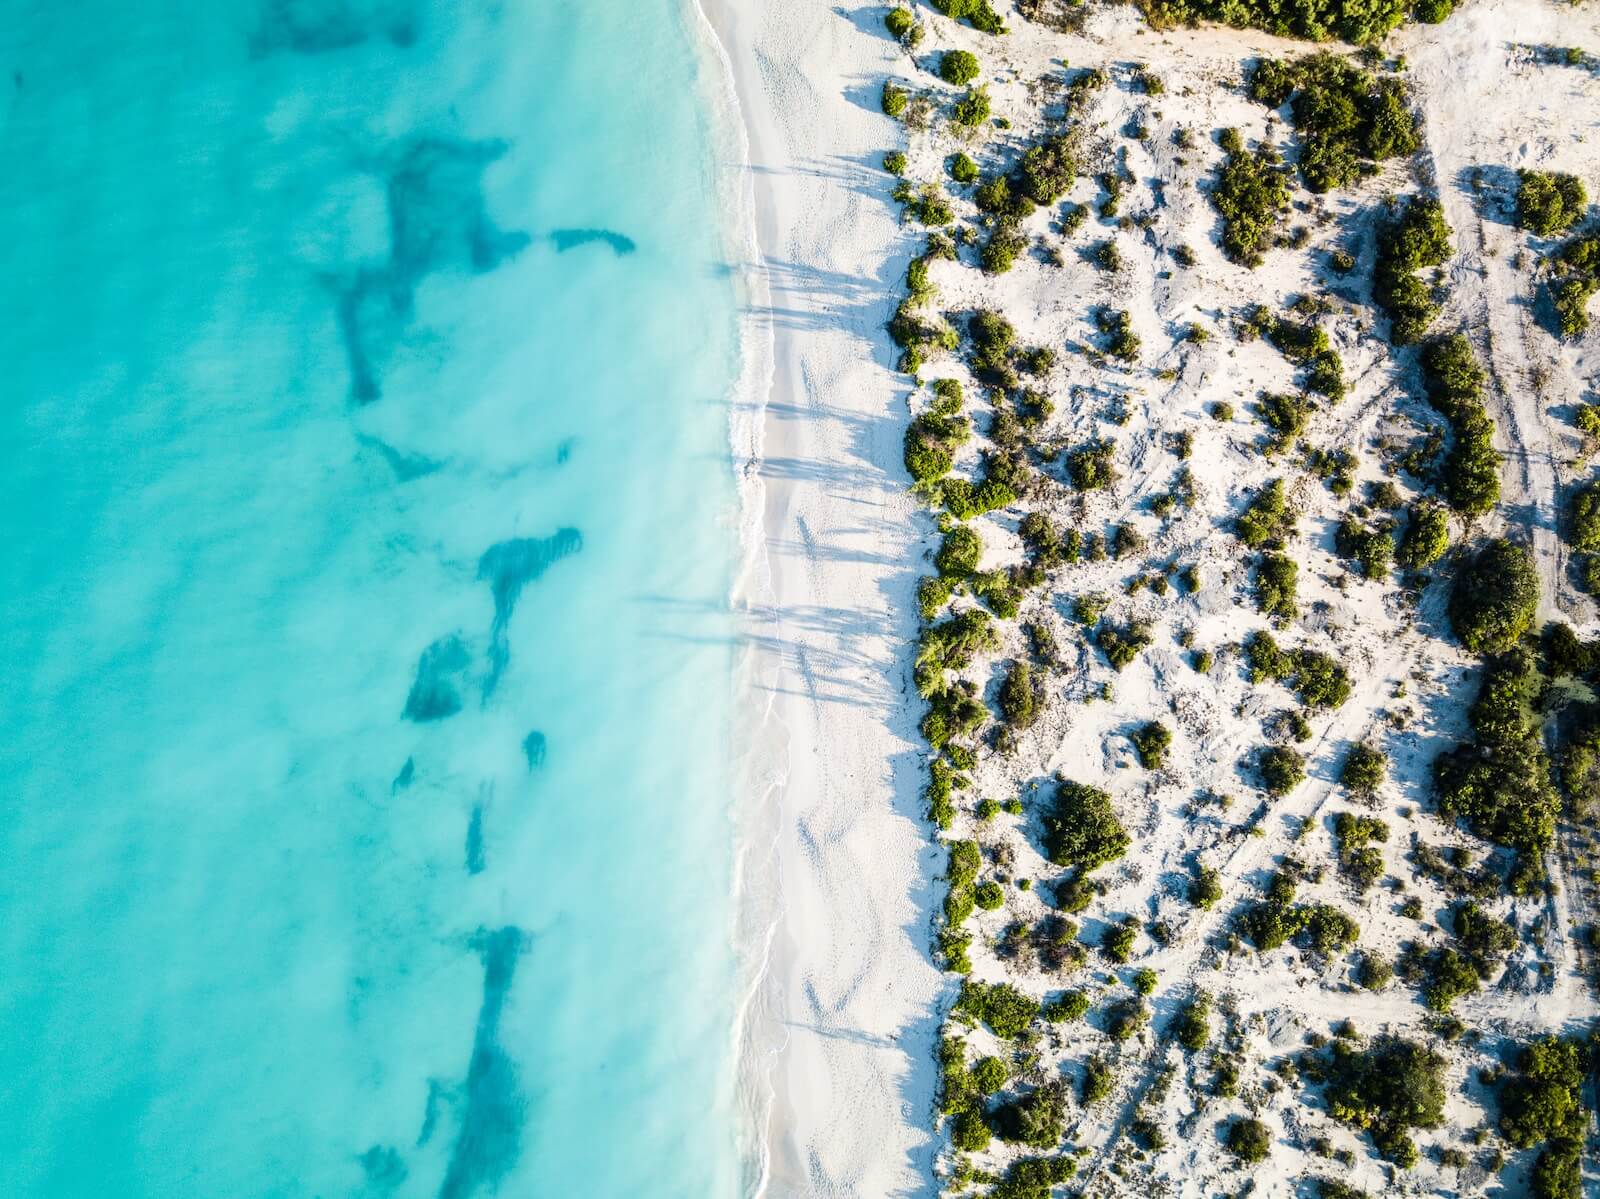 An aerial view of the coastline in Turks and Caicos